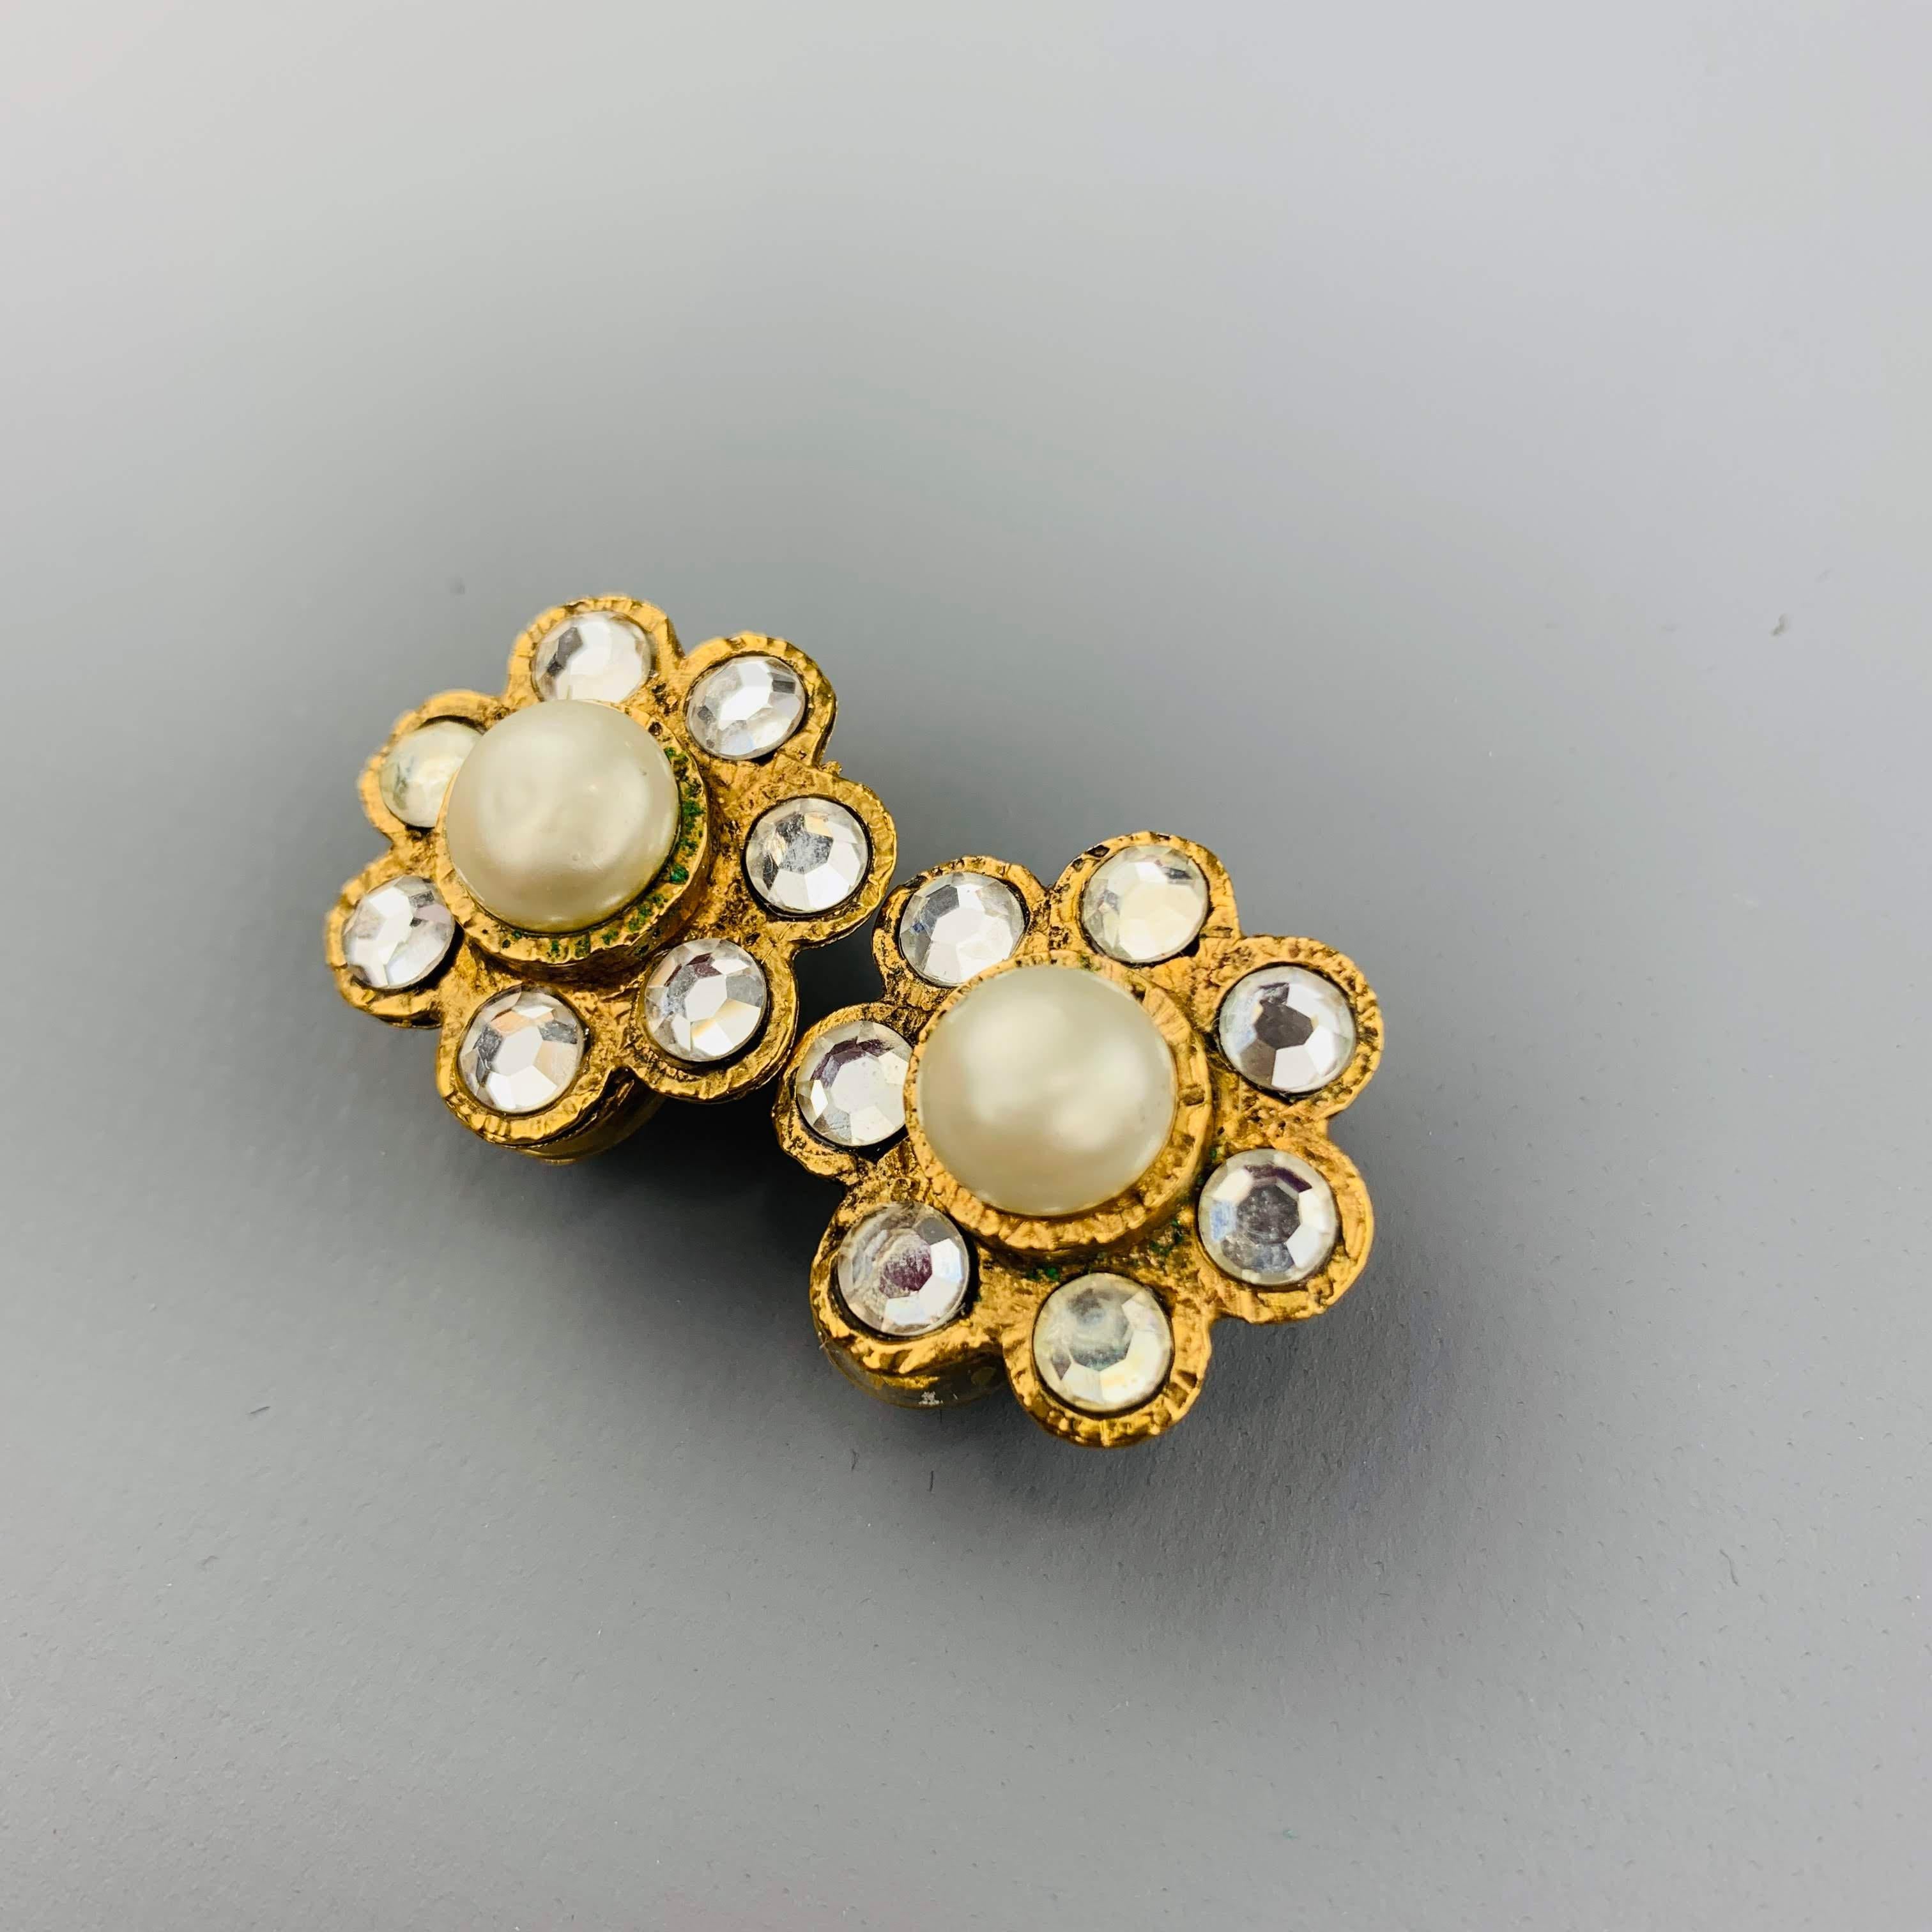 Vintage CHANEL circa 1996 clip on earrings come in yellow gold tone metal and feature a cluster of clear rhinestones in a flower formation with faux pear center. Made in France.
 
Good Pre-Owned Condition.
Marked: 96 A
 
1.5 cm.